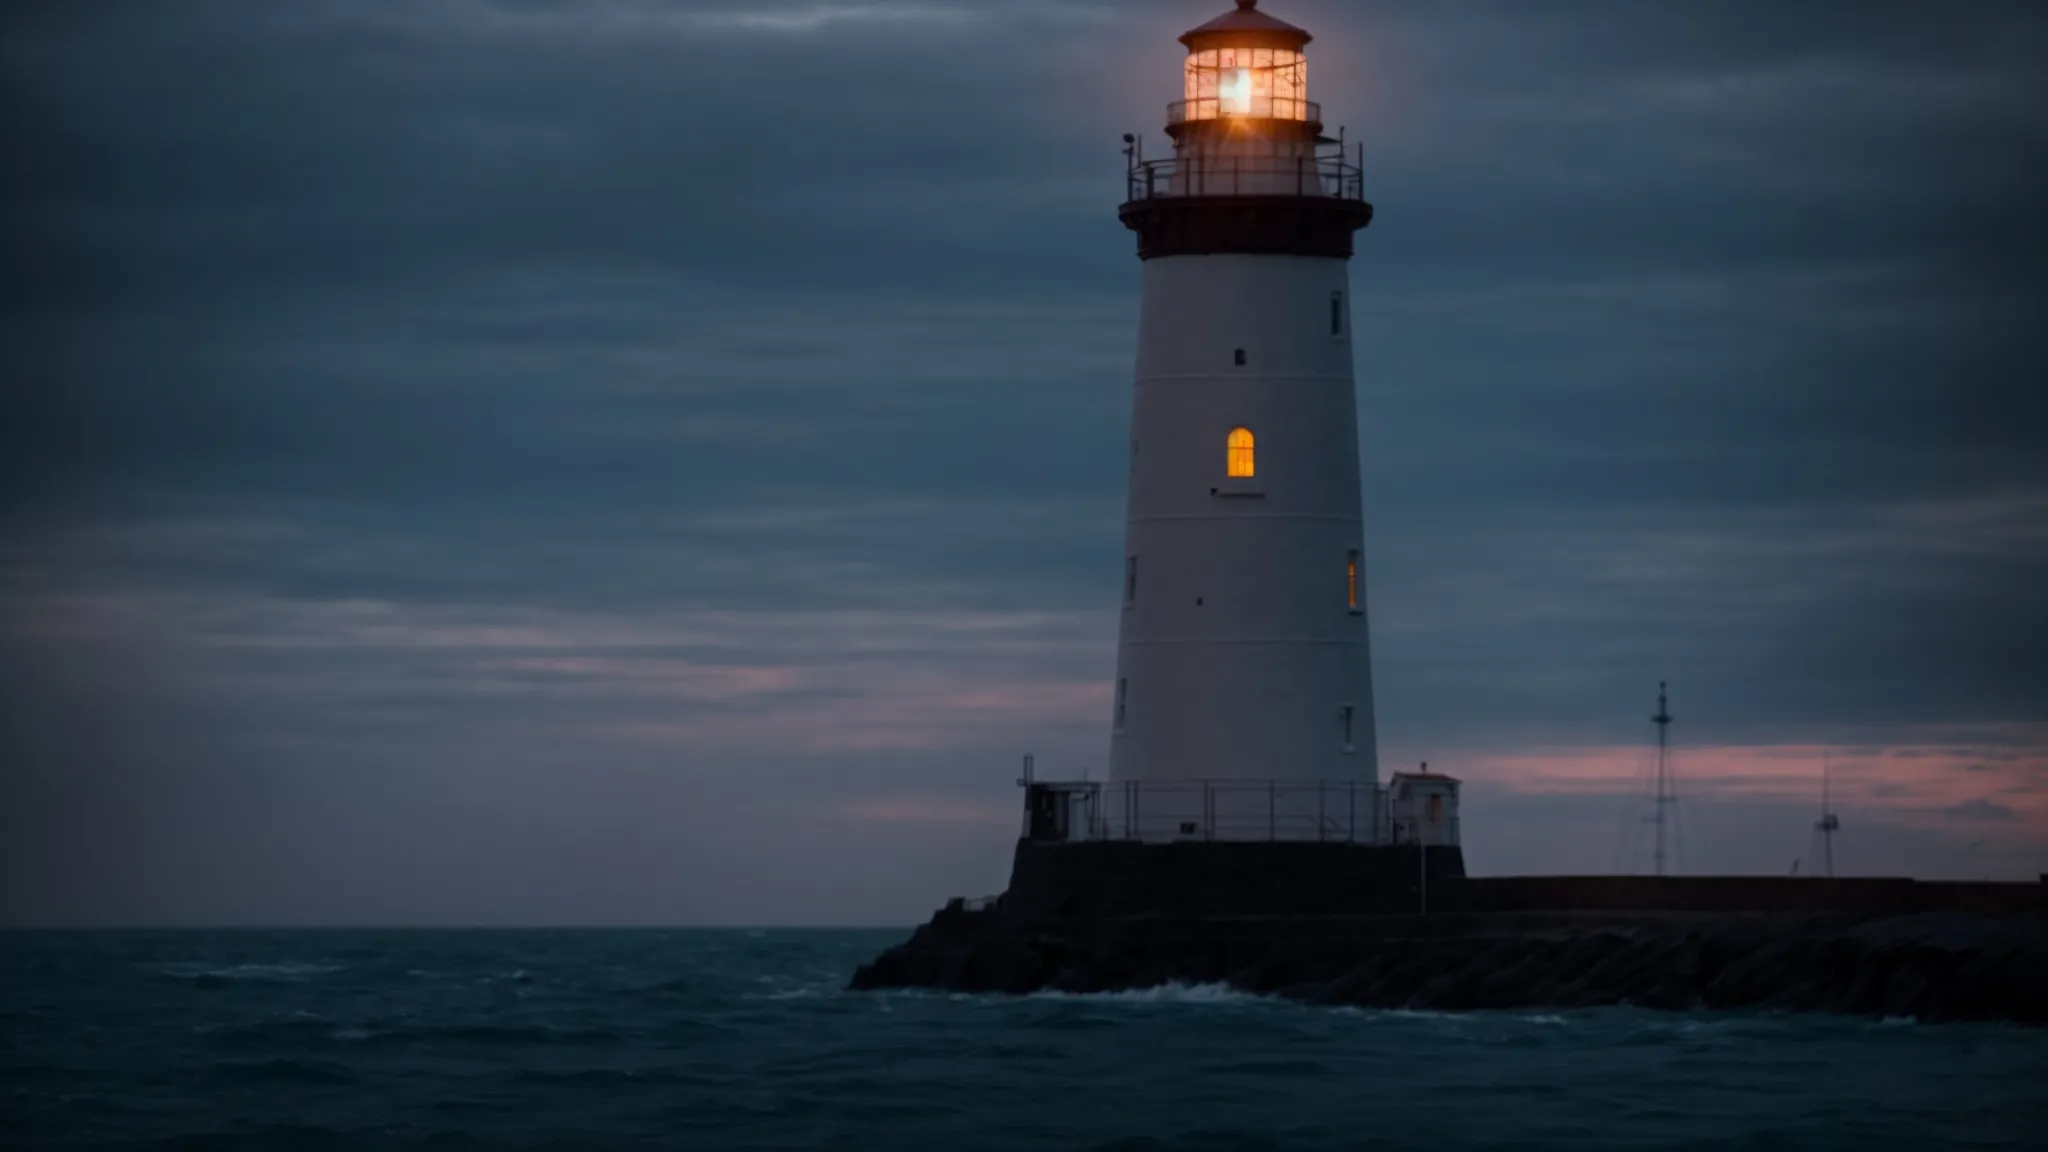 a lighthouse stands tall at dusk, its beam cutting through the twilight, guiding ships safely to shore.